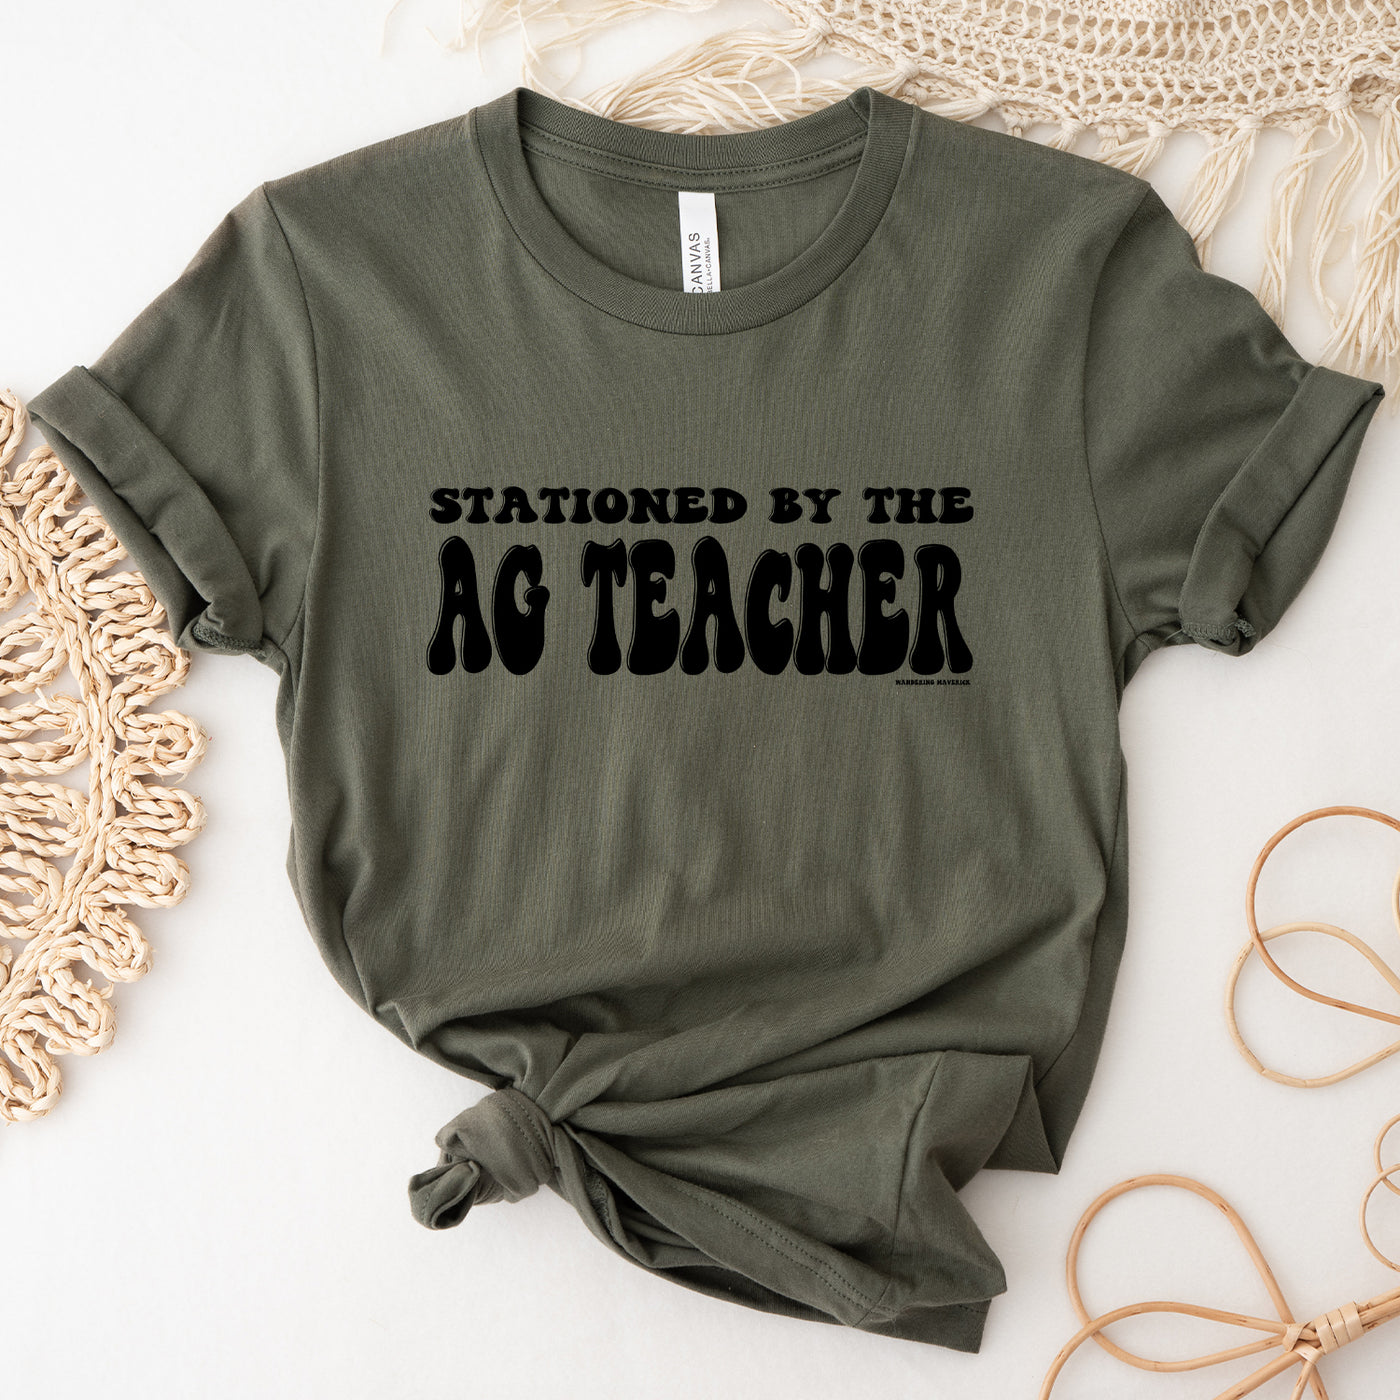 Stationed By The Ag Teacher T-Shirt (XS-4XL) - Multiple Colors!